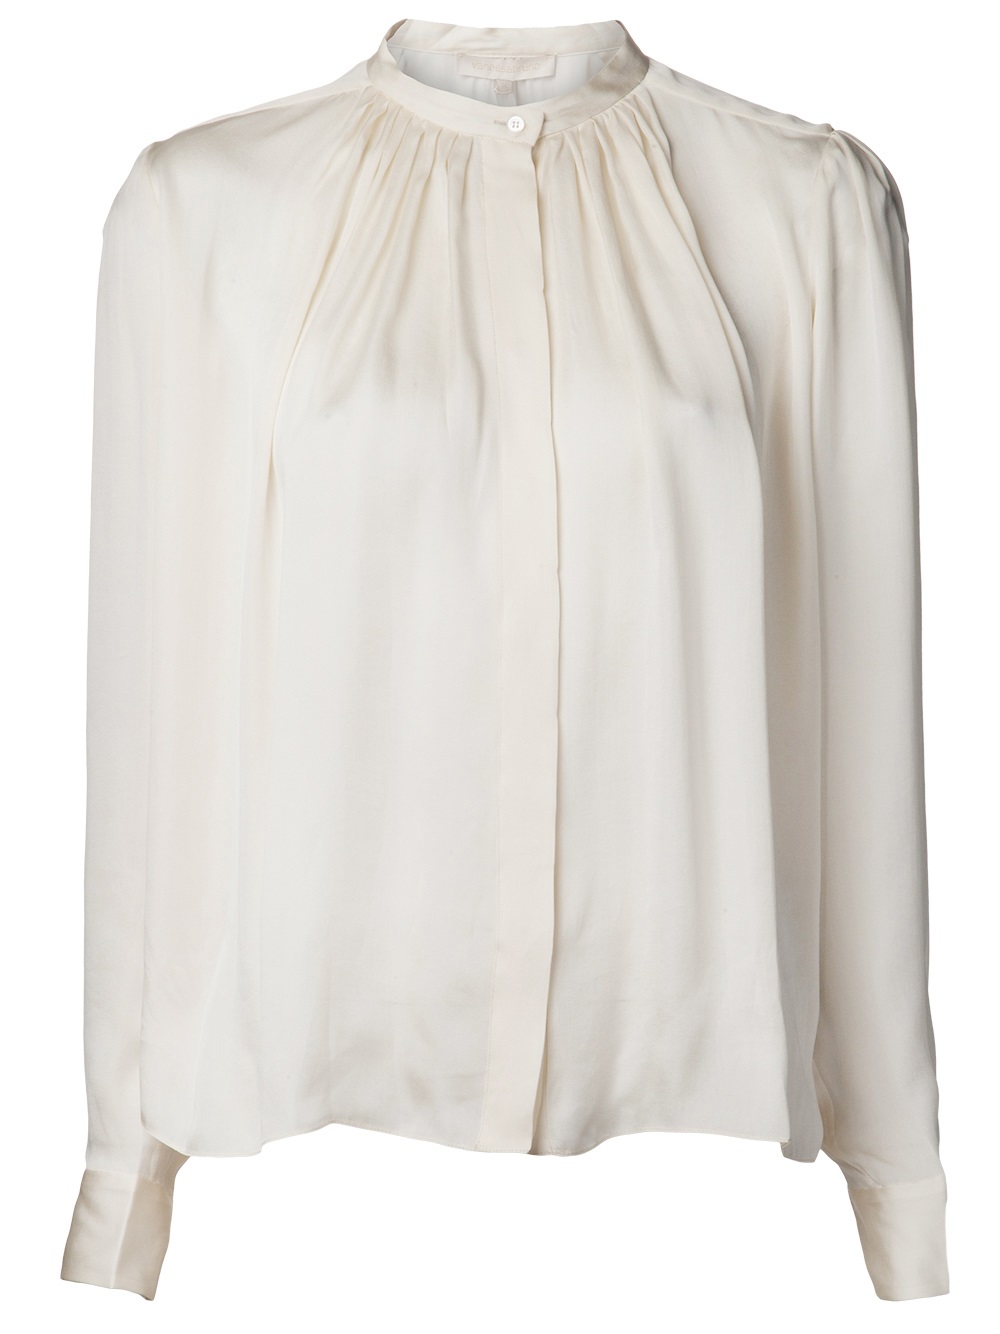 Lyst - Vanessa Bruno Pleated Button Down Blouse in White